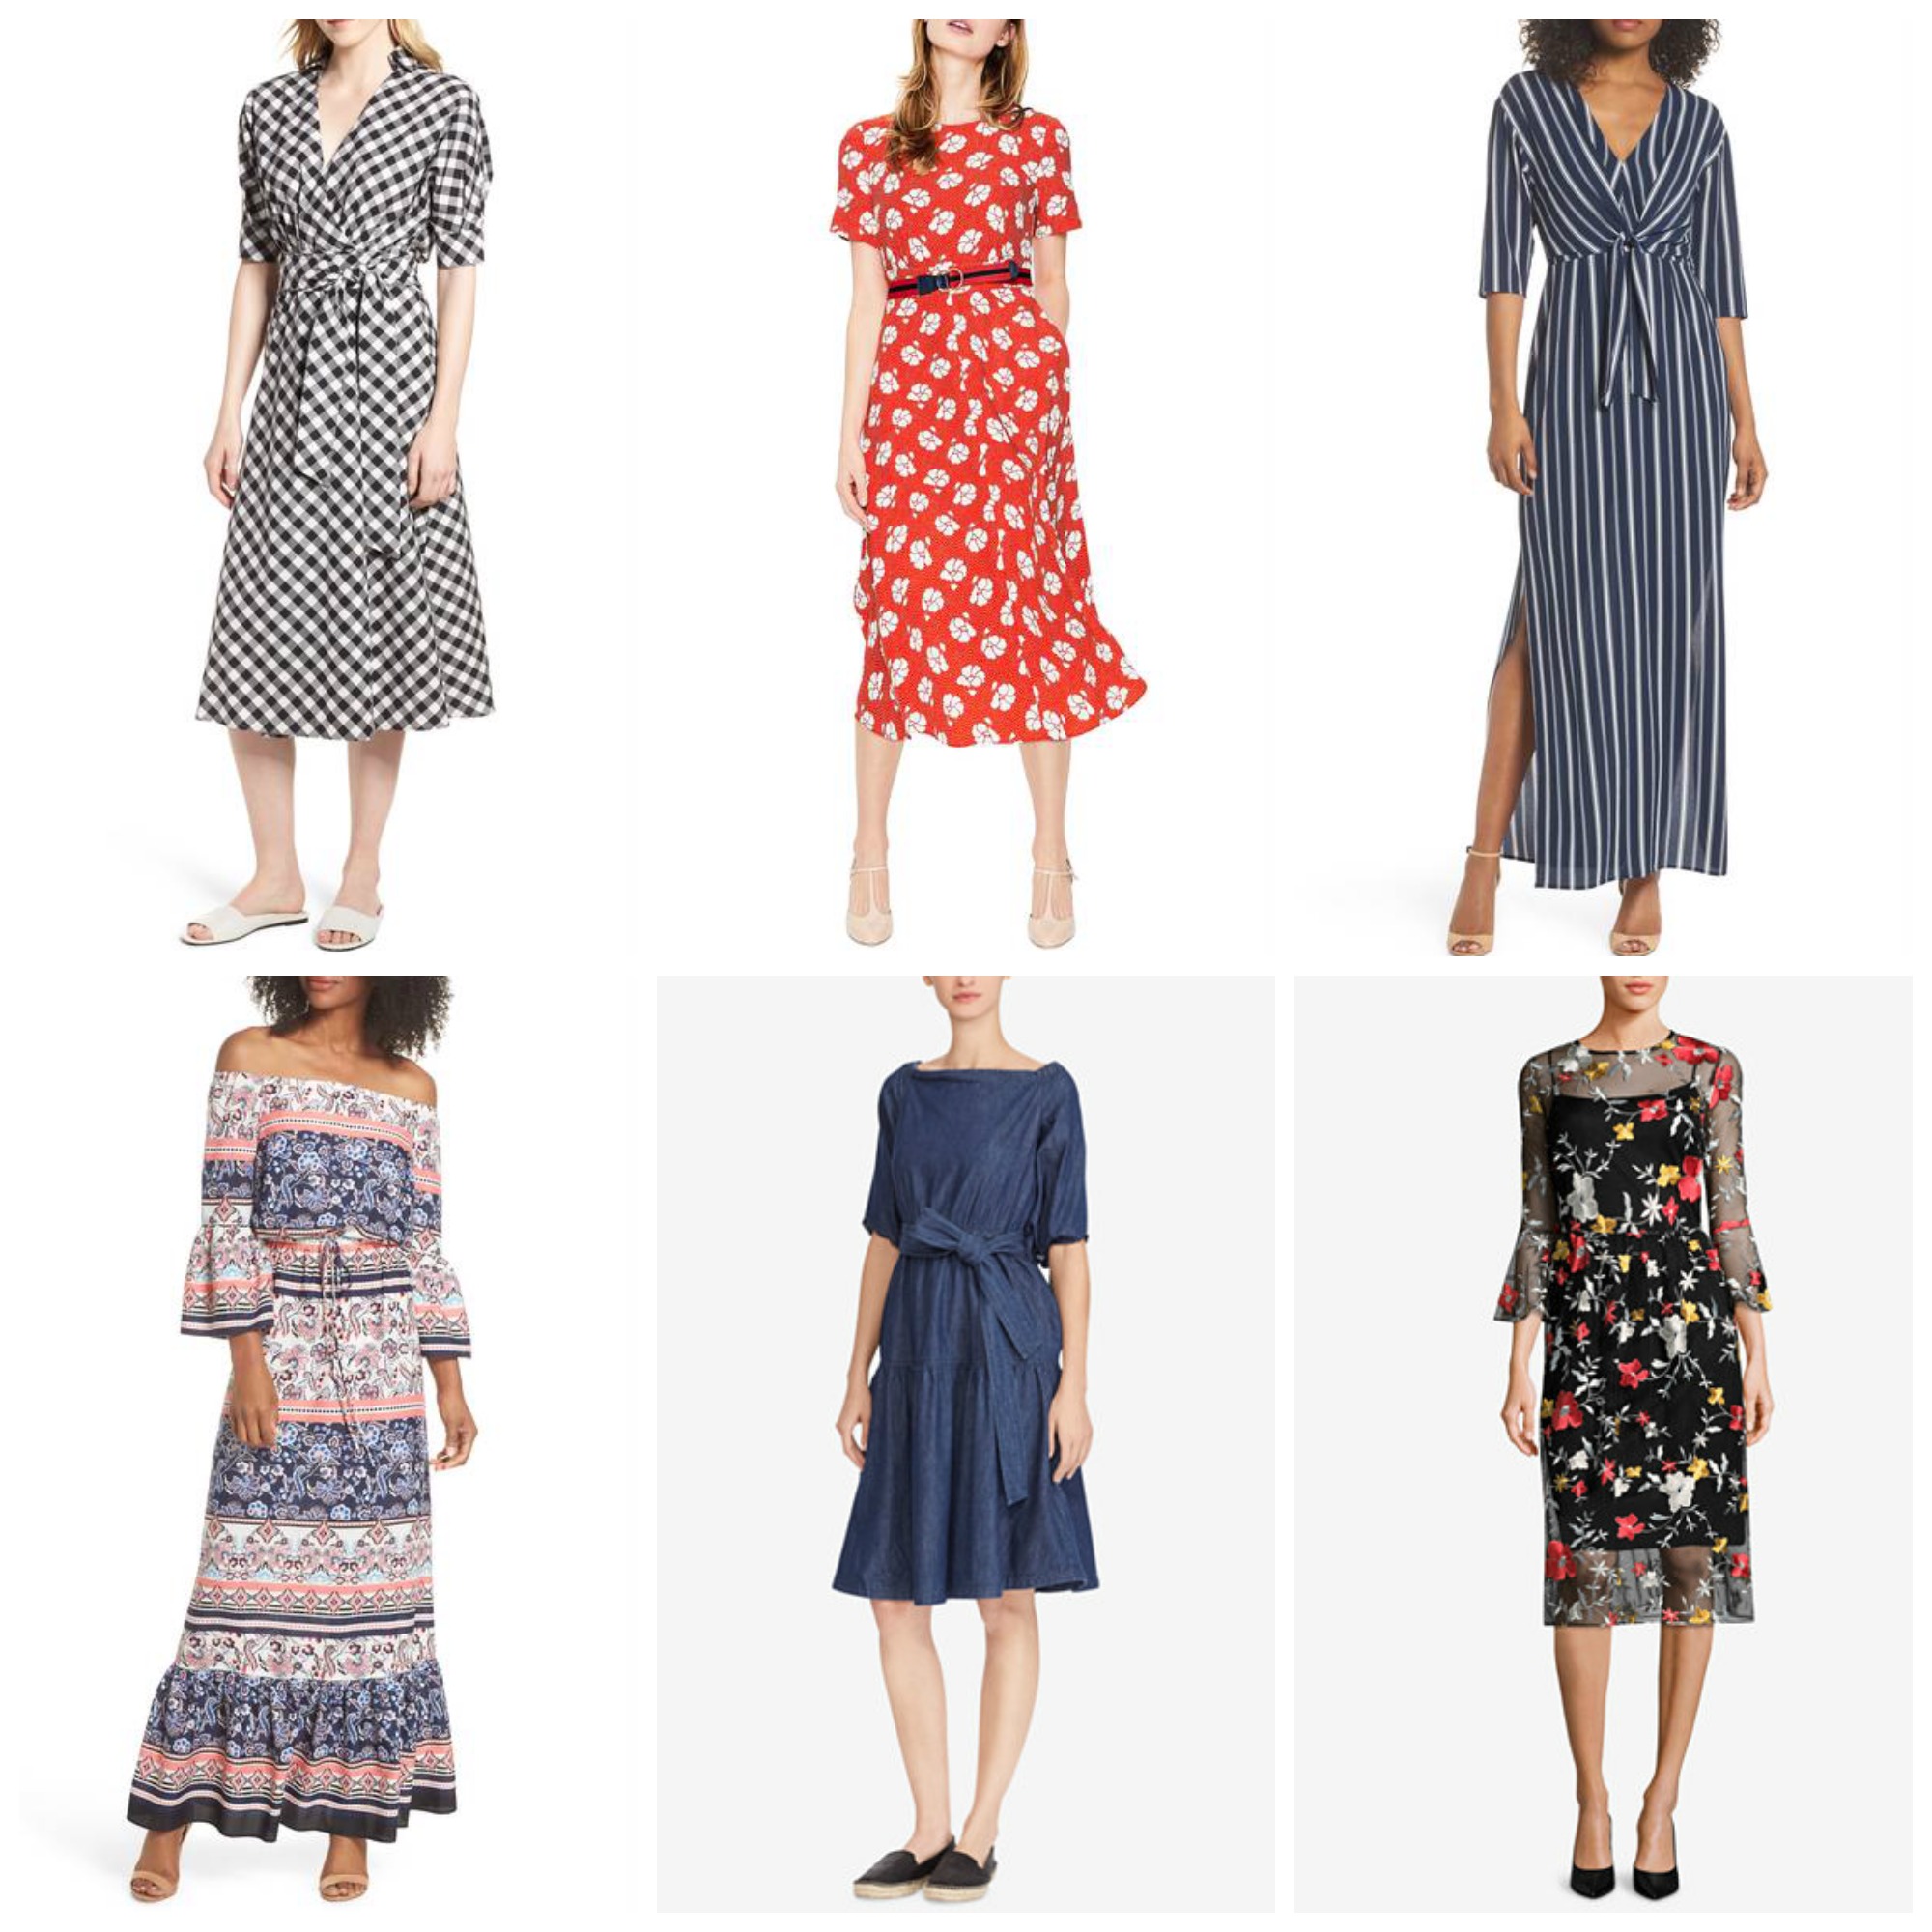 Spring Dresses Over 40 (& Link Up) - Fashion Should Be Fun